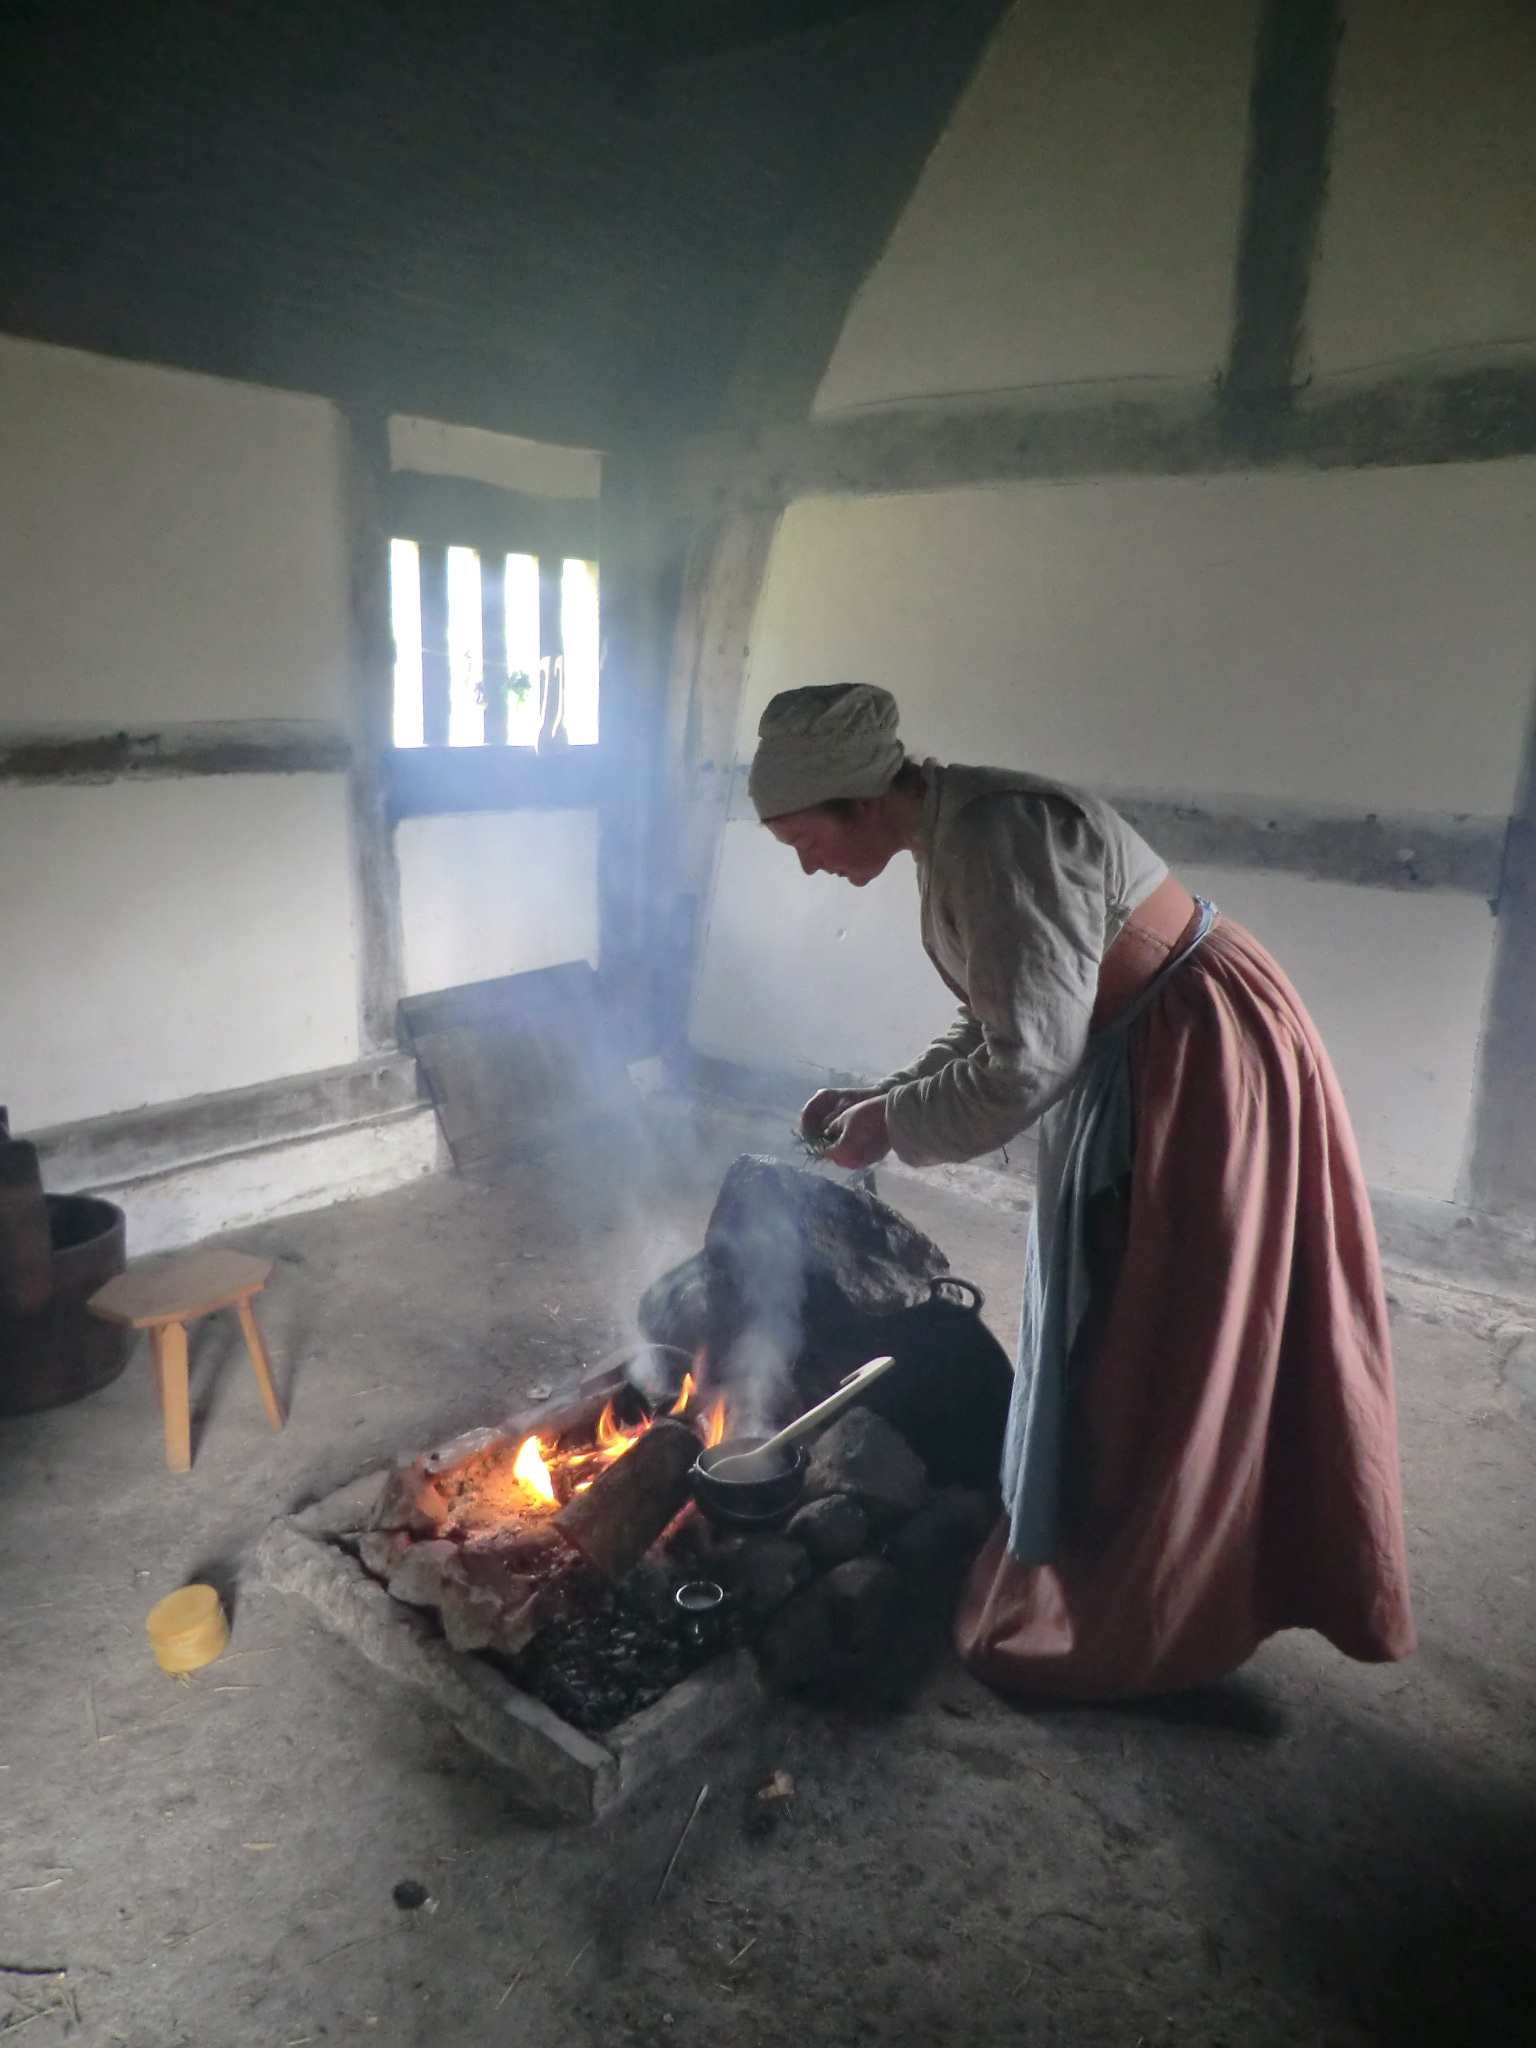 A woman dressed in 1530s style adds spices to a cauldron